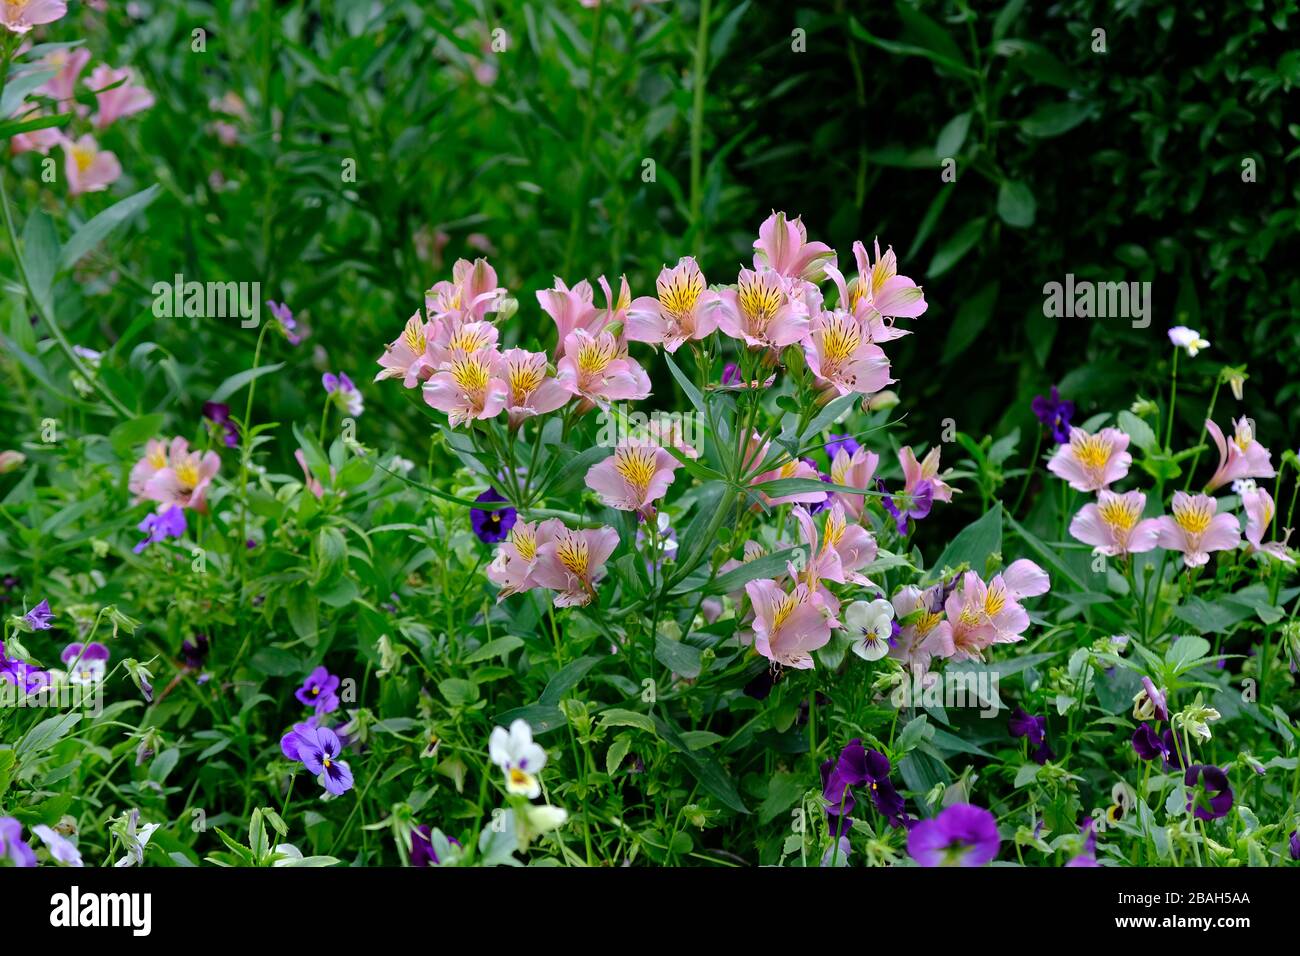 Pink peruvian lily flower close-up. Shrubs Decorative Peruvian Lily in a botanical garden. Stock Photo